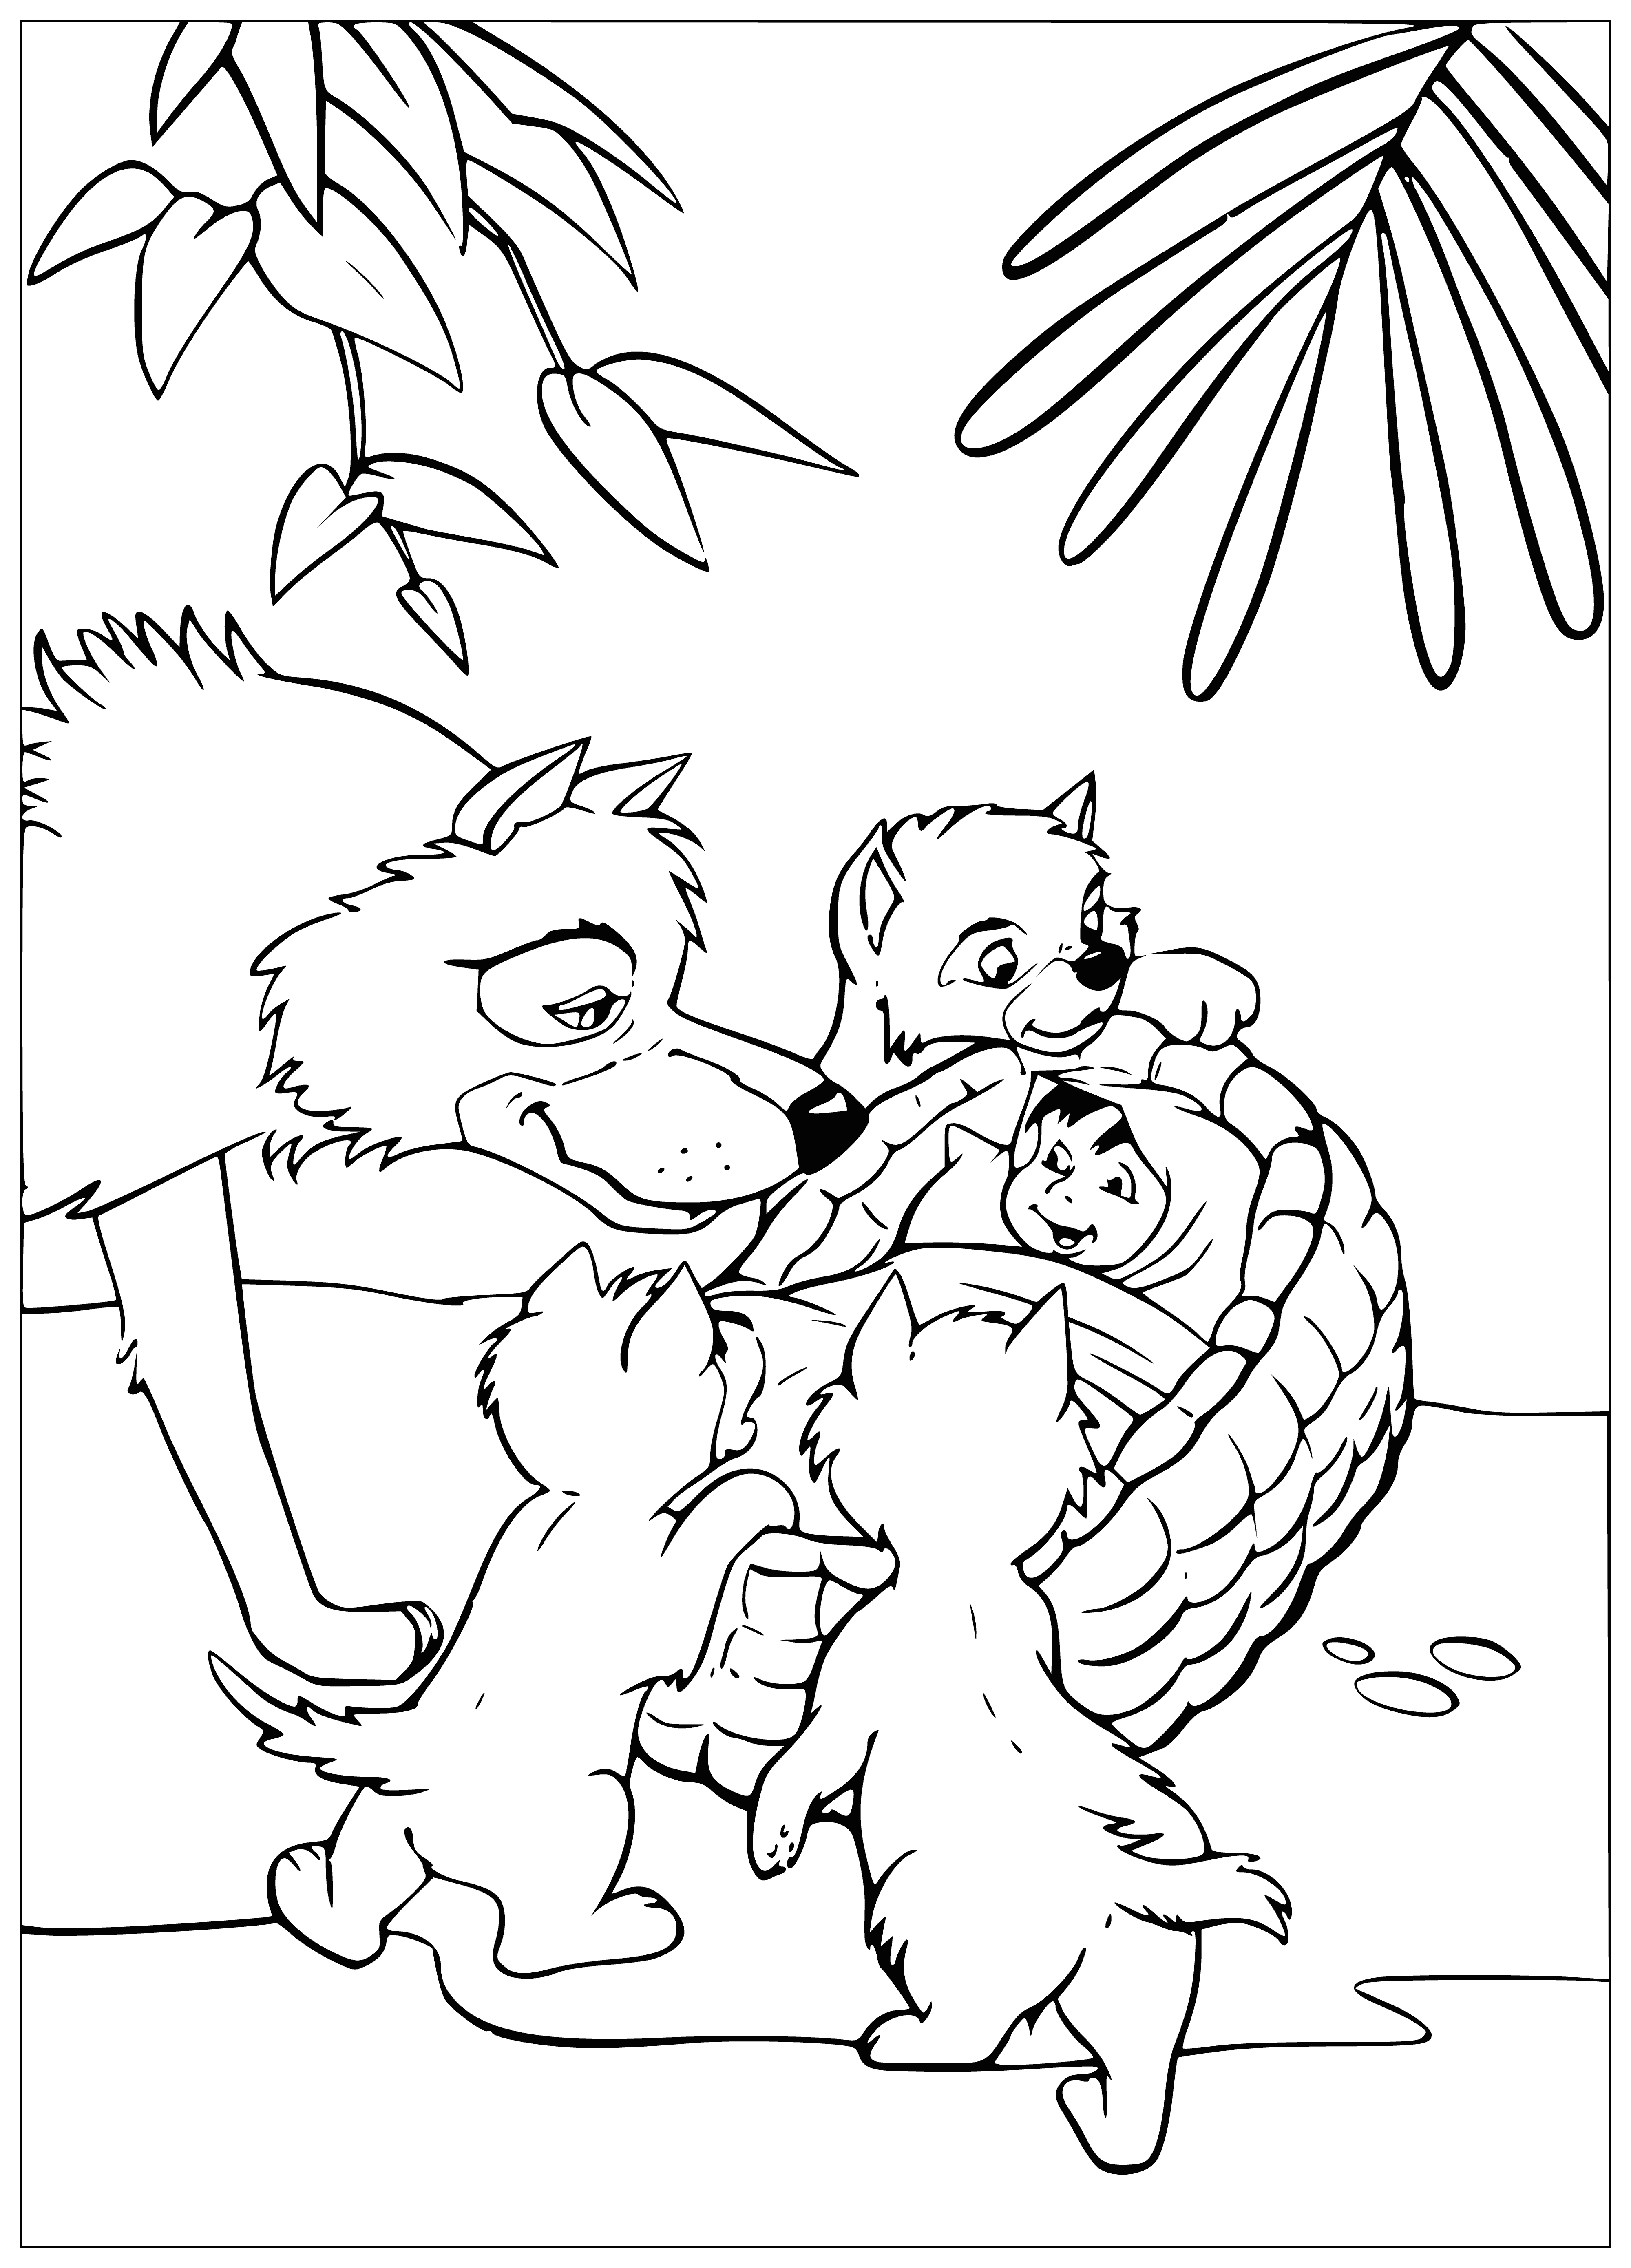 Wolves and Mowgli coloring page